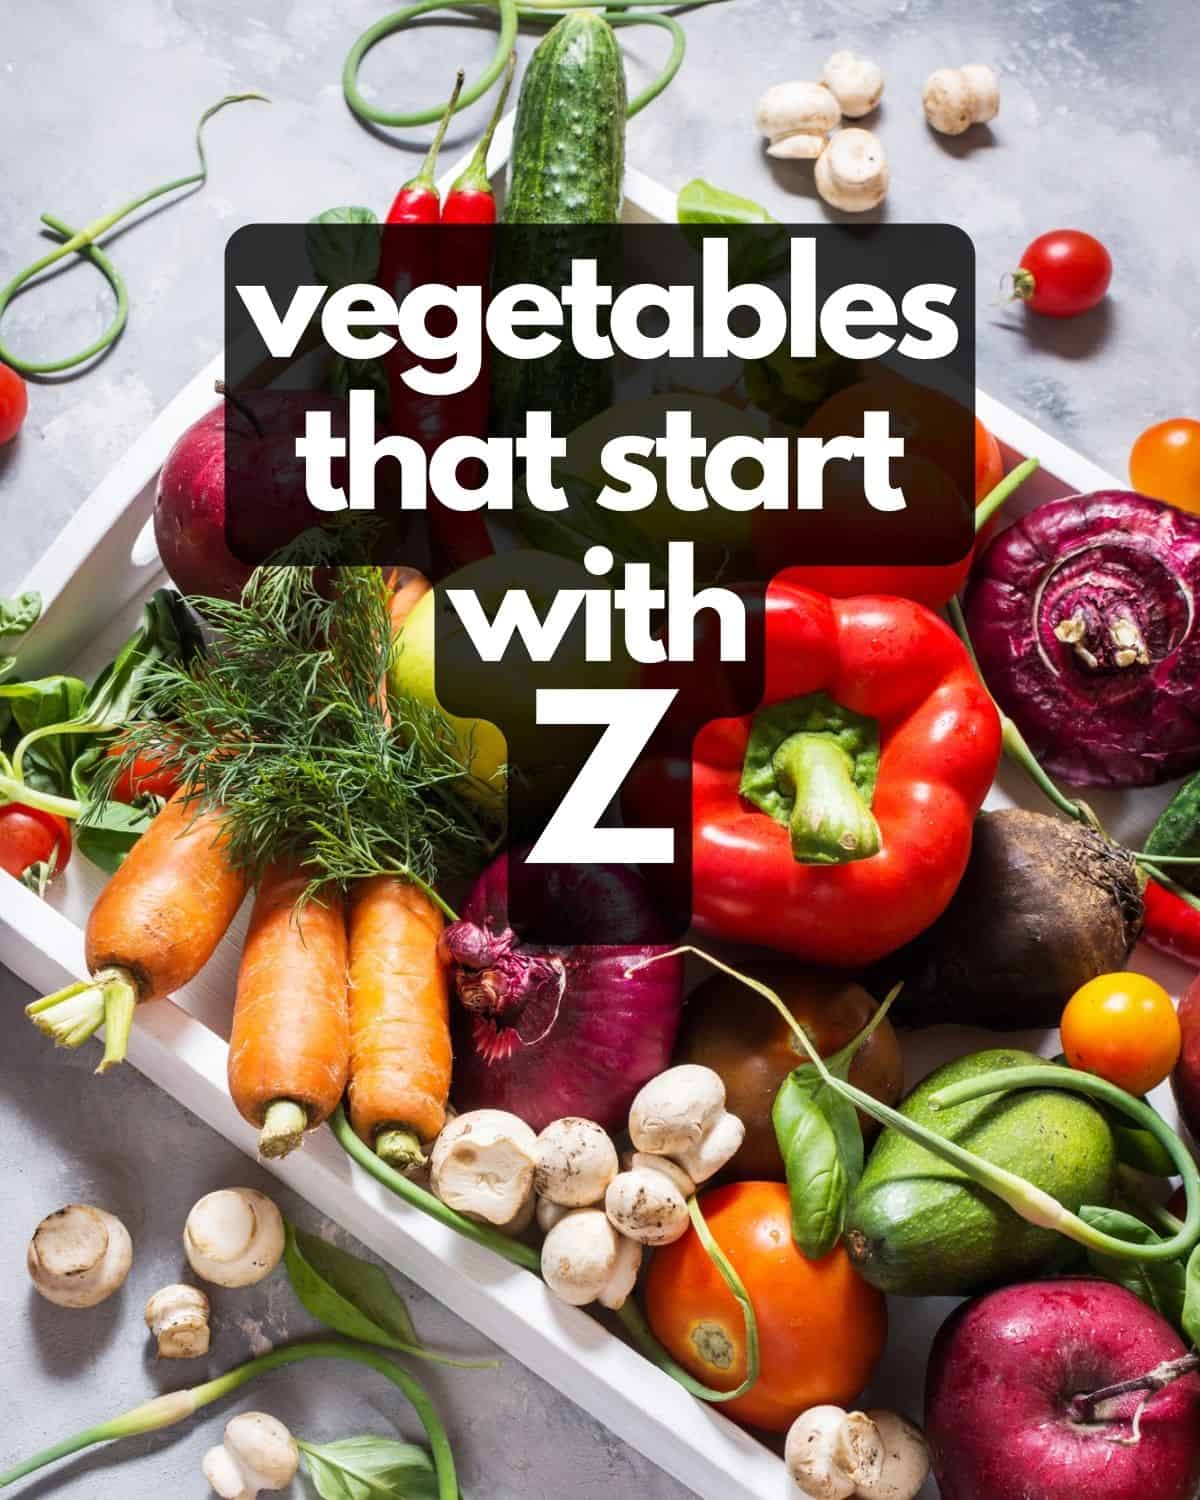 Table of vegetables, plus text: Vegetables that start with Z.